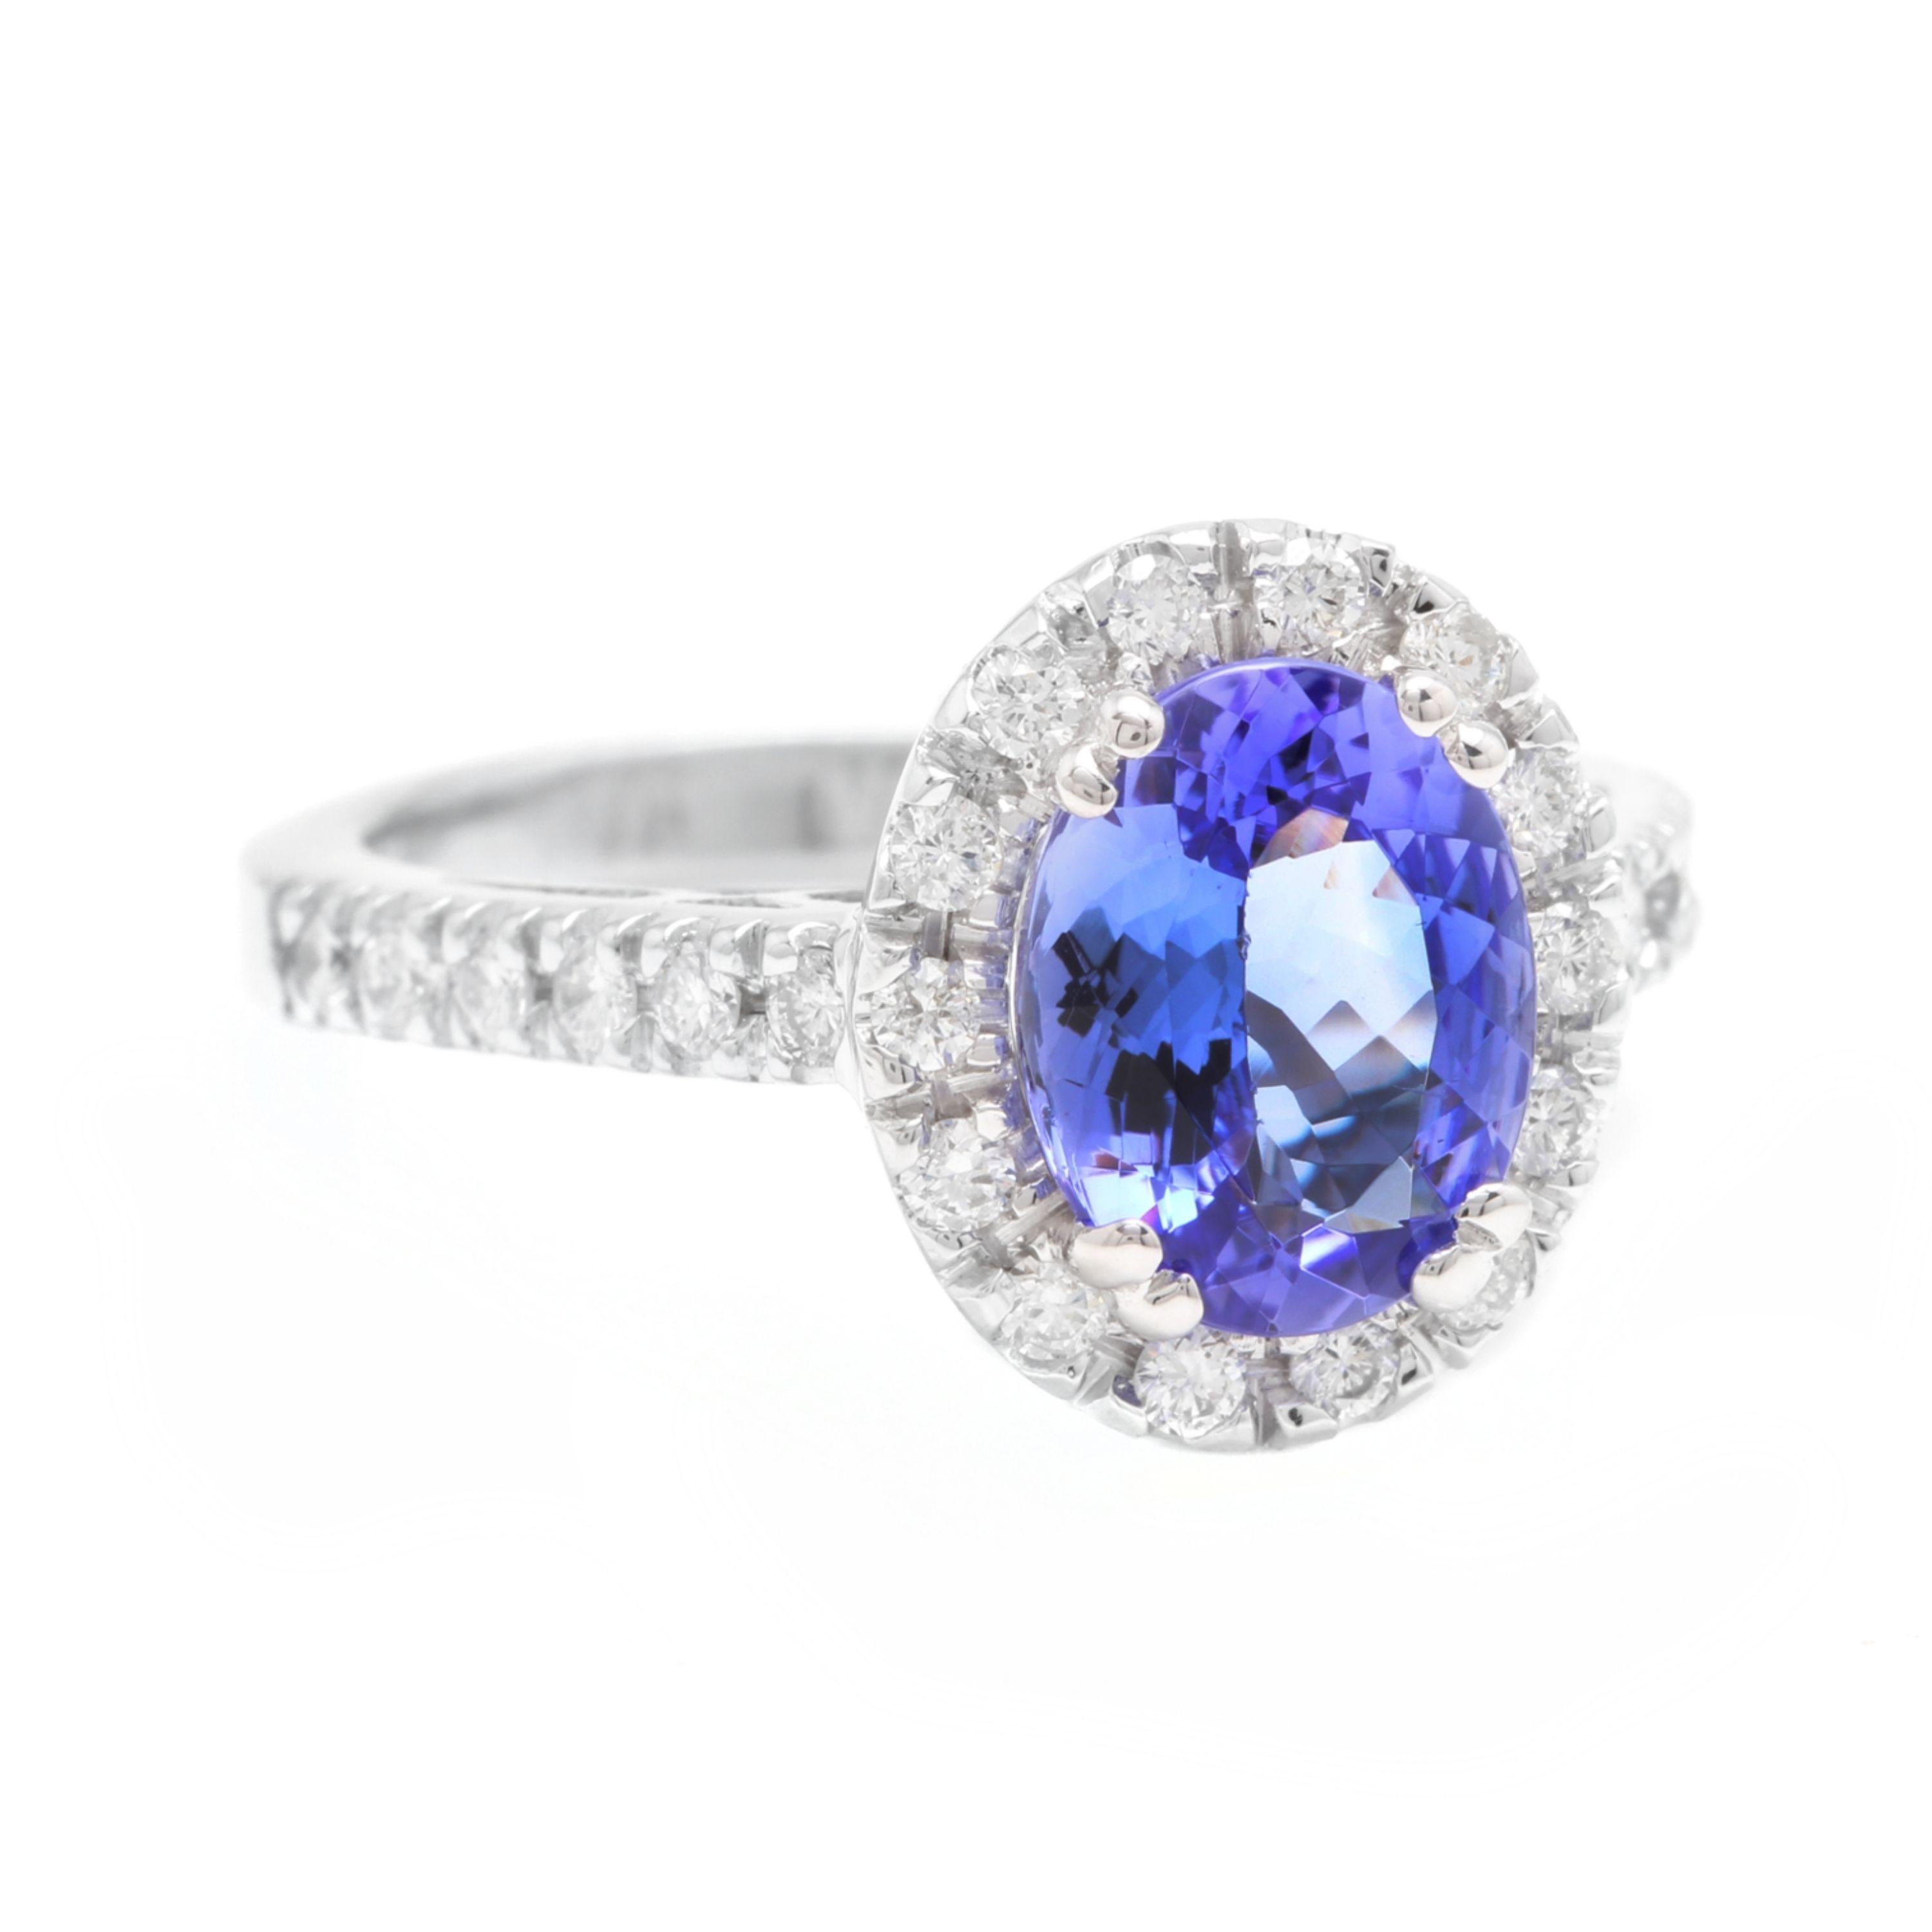 3.00 Carats Natural Very Nice Looking Tanzanite and Diamond 14K Solid White Gold Ring

Total Natural Oval Cut Tanzanite Weight is: Approx. 2.40 Carats

Tanzanite Measures: 9.5 x 7.5mm

Natural Round Diamonds Weight: 0.60 Carats (color G-H / Clarity